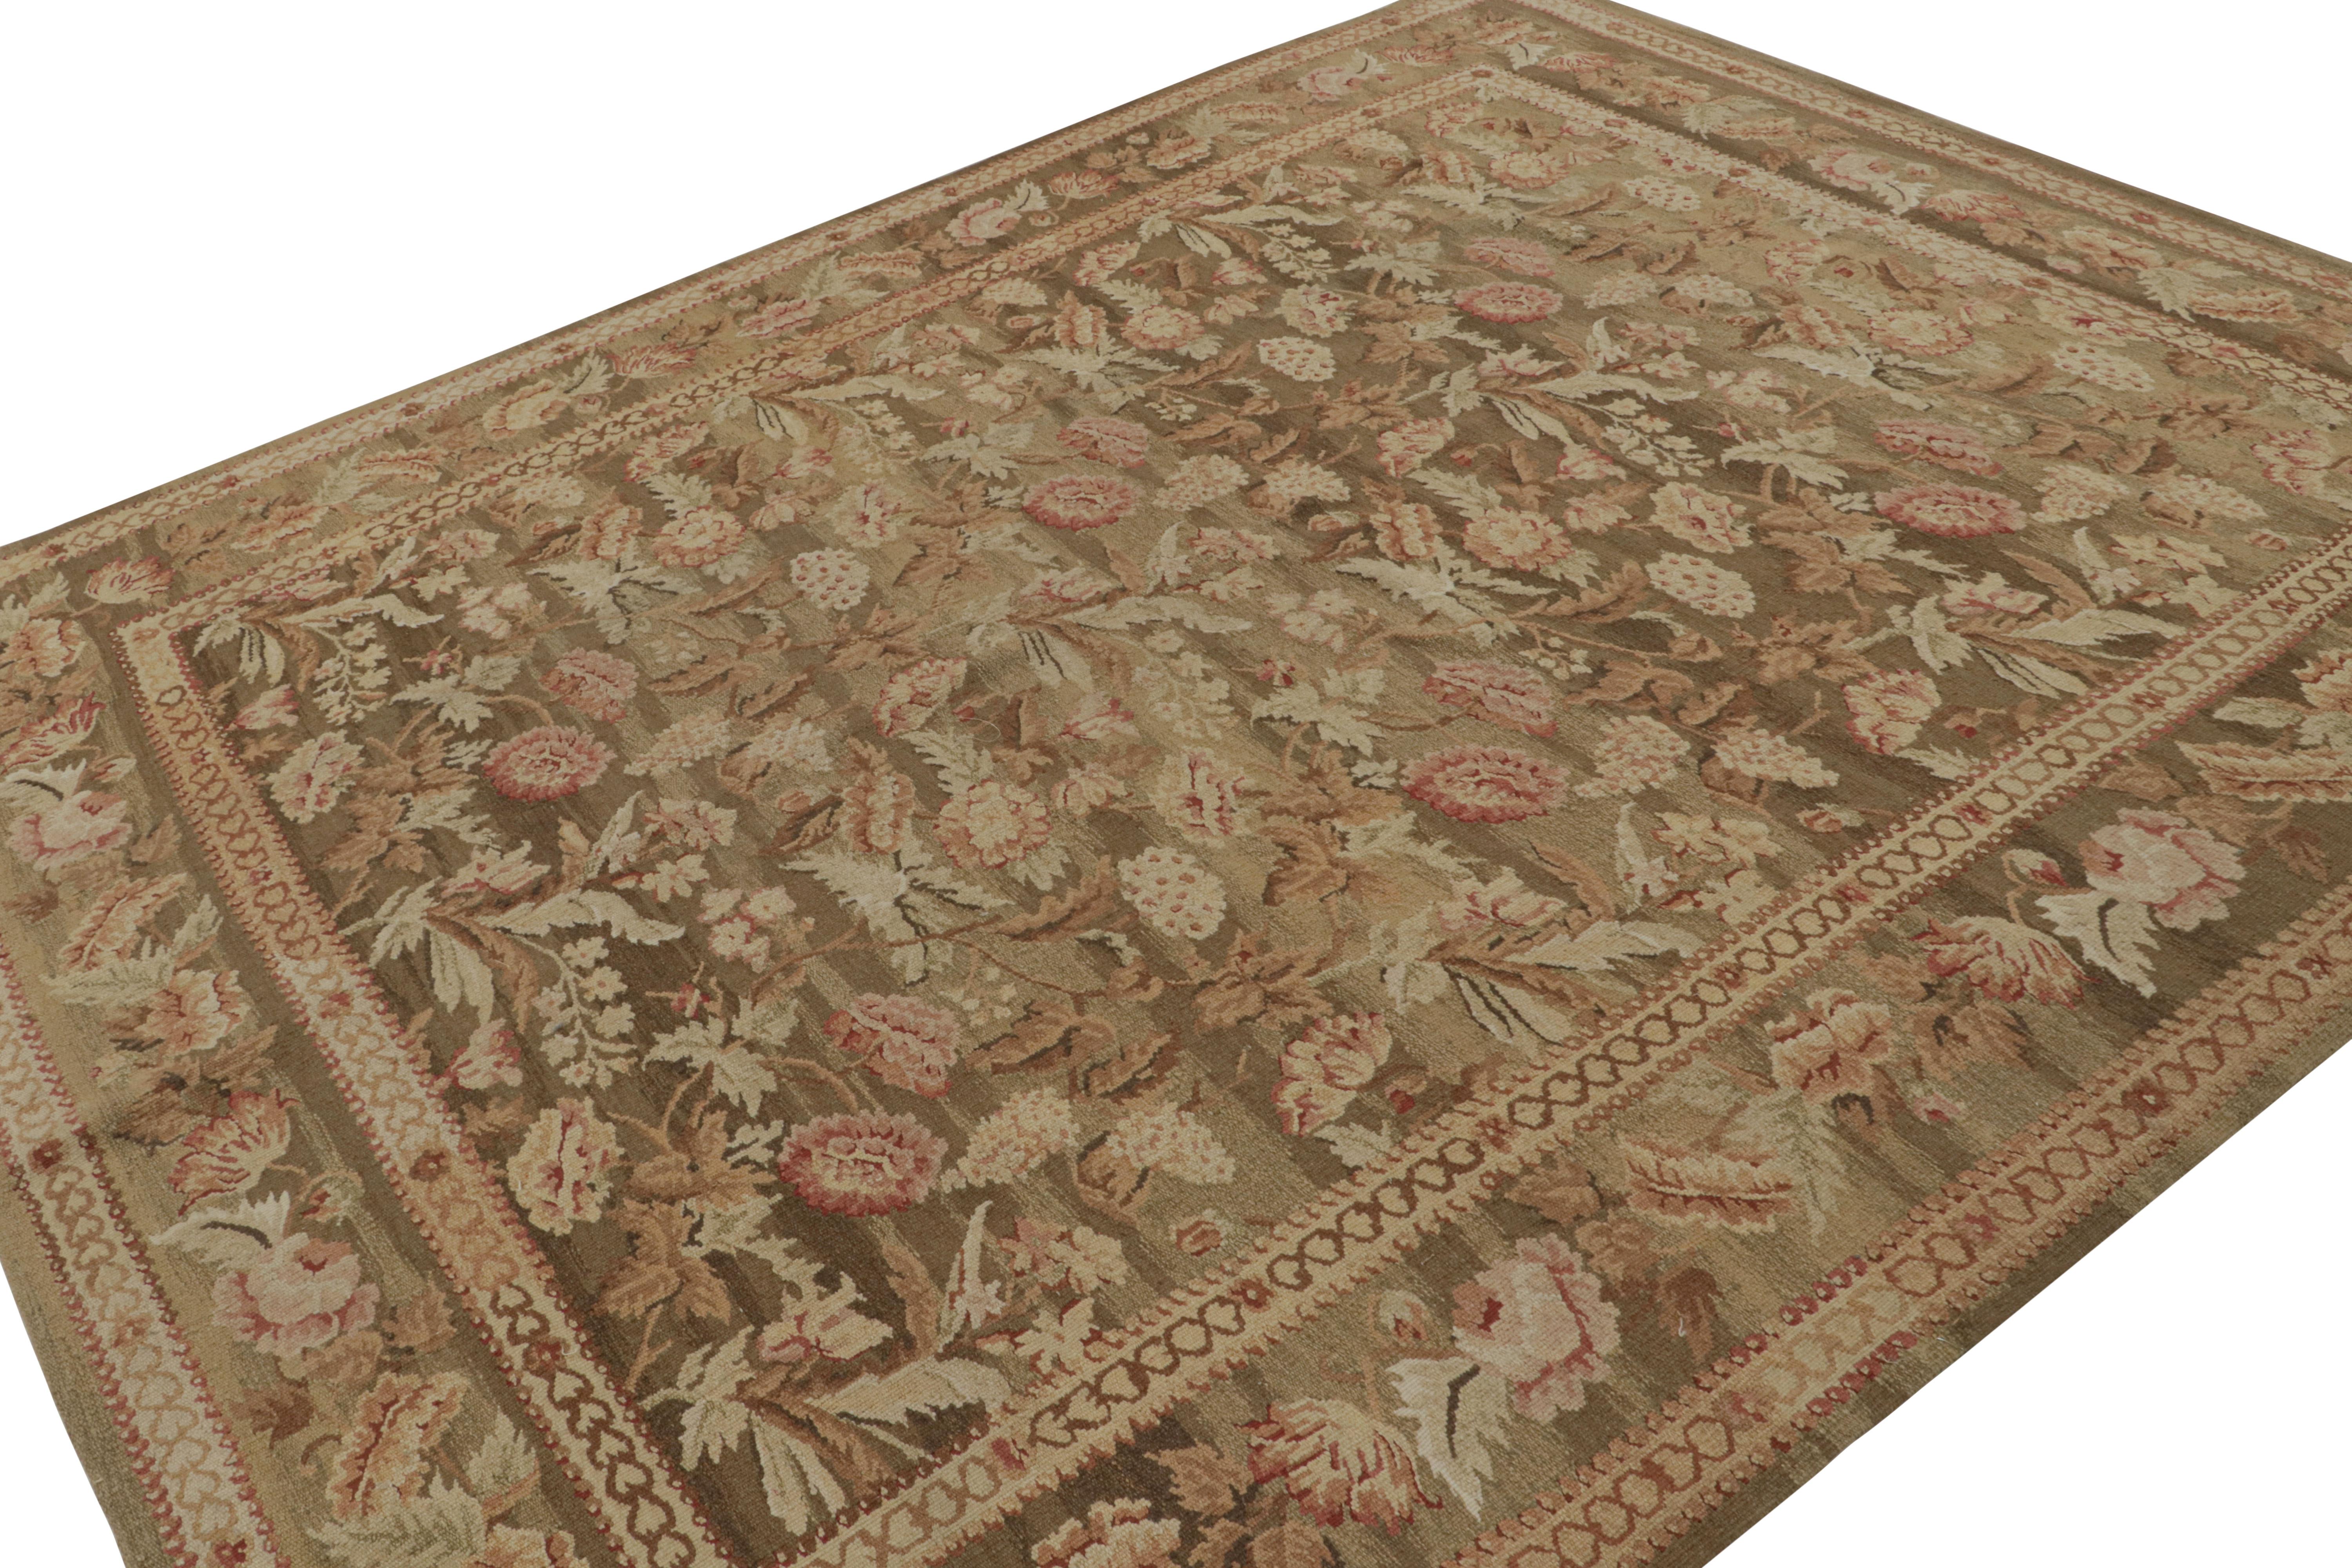 Handwoven in wool, this 8x10 Aubusson flatweave rug in rich beige/brown features colorful floral botanical patterns in present pink and cream tones. 

On the Design: 

This design has been Inspired by 18th century Aubusson rugs and tapestries in